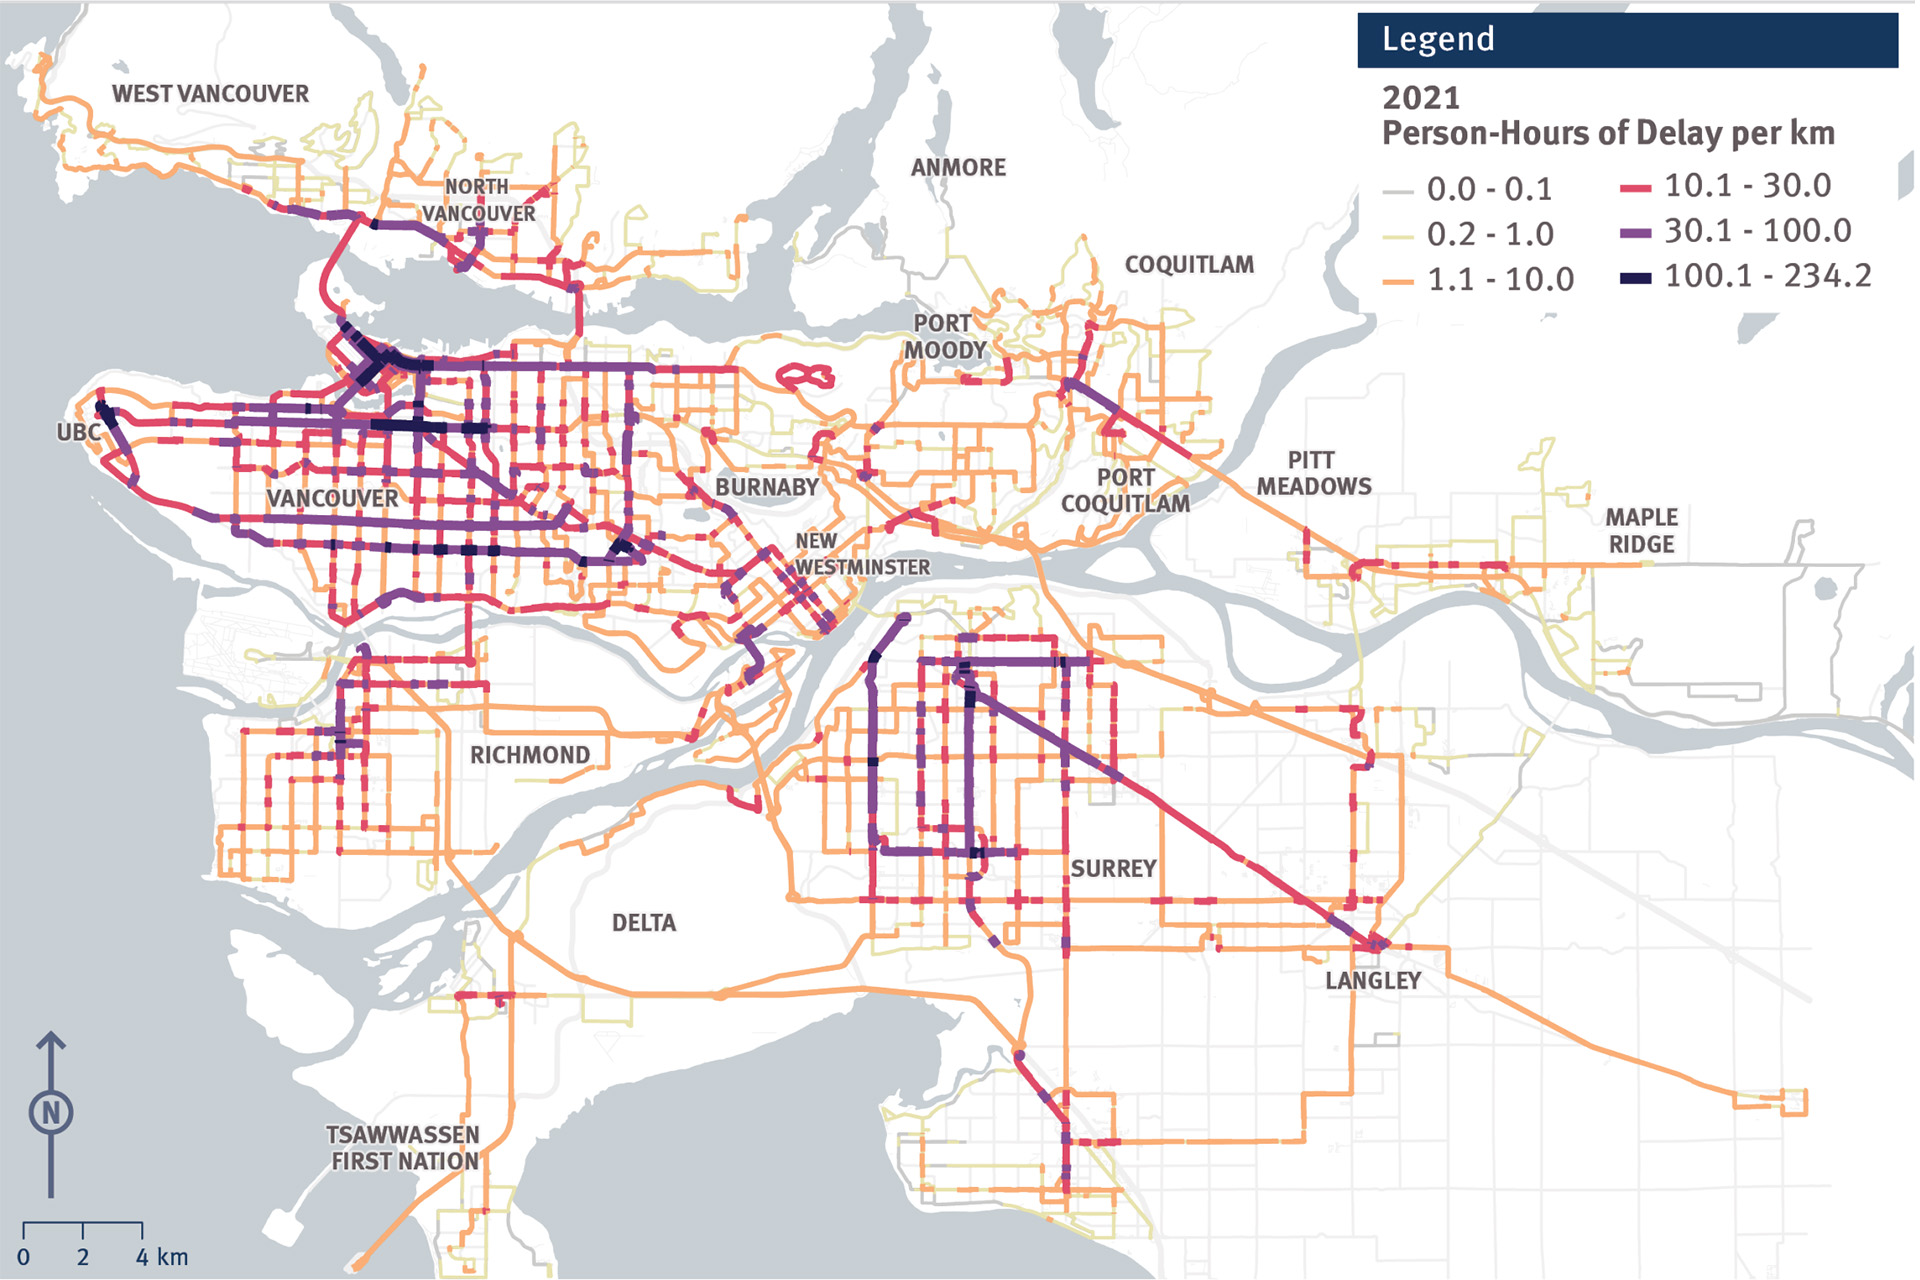 Fall 2021 bus person-hours of delay per km